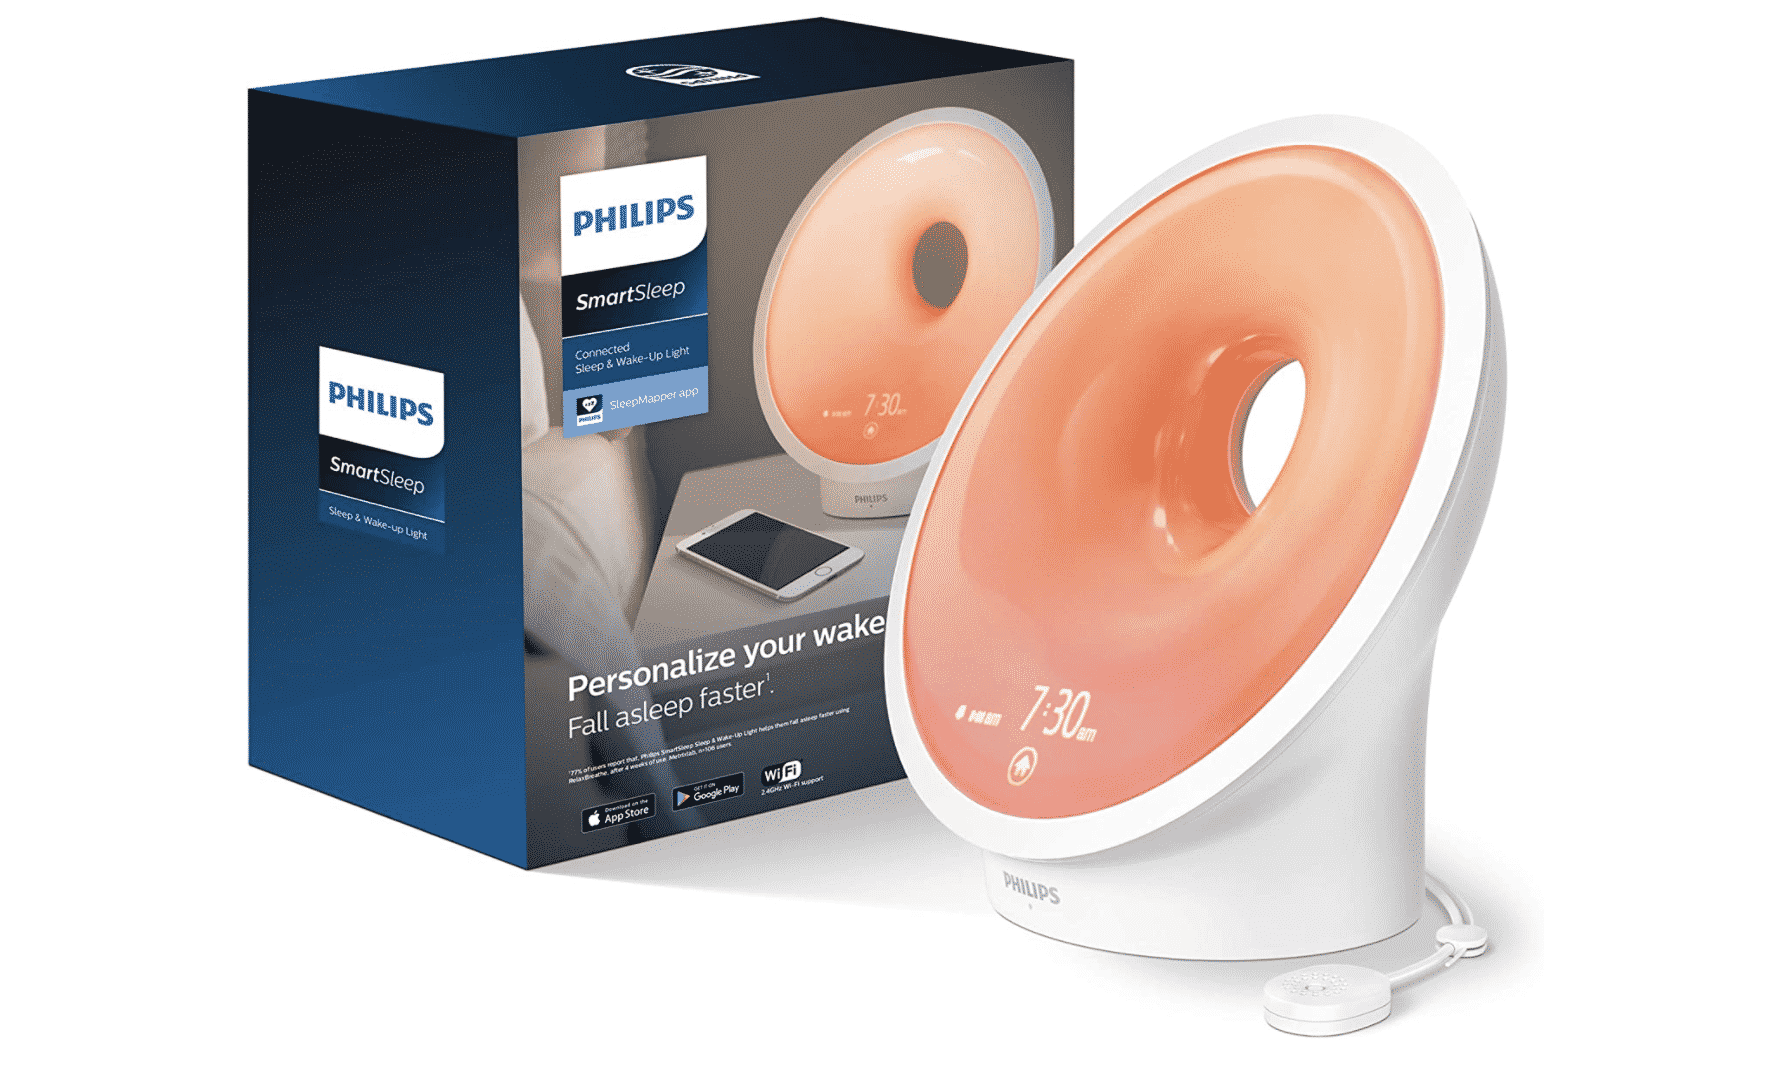 Philips SmartSleep Connected Therapy Lamp